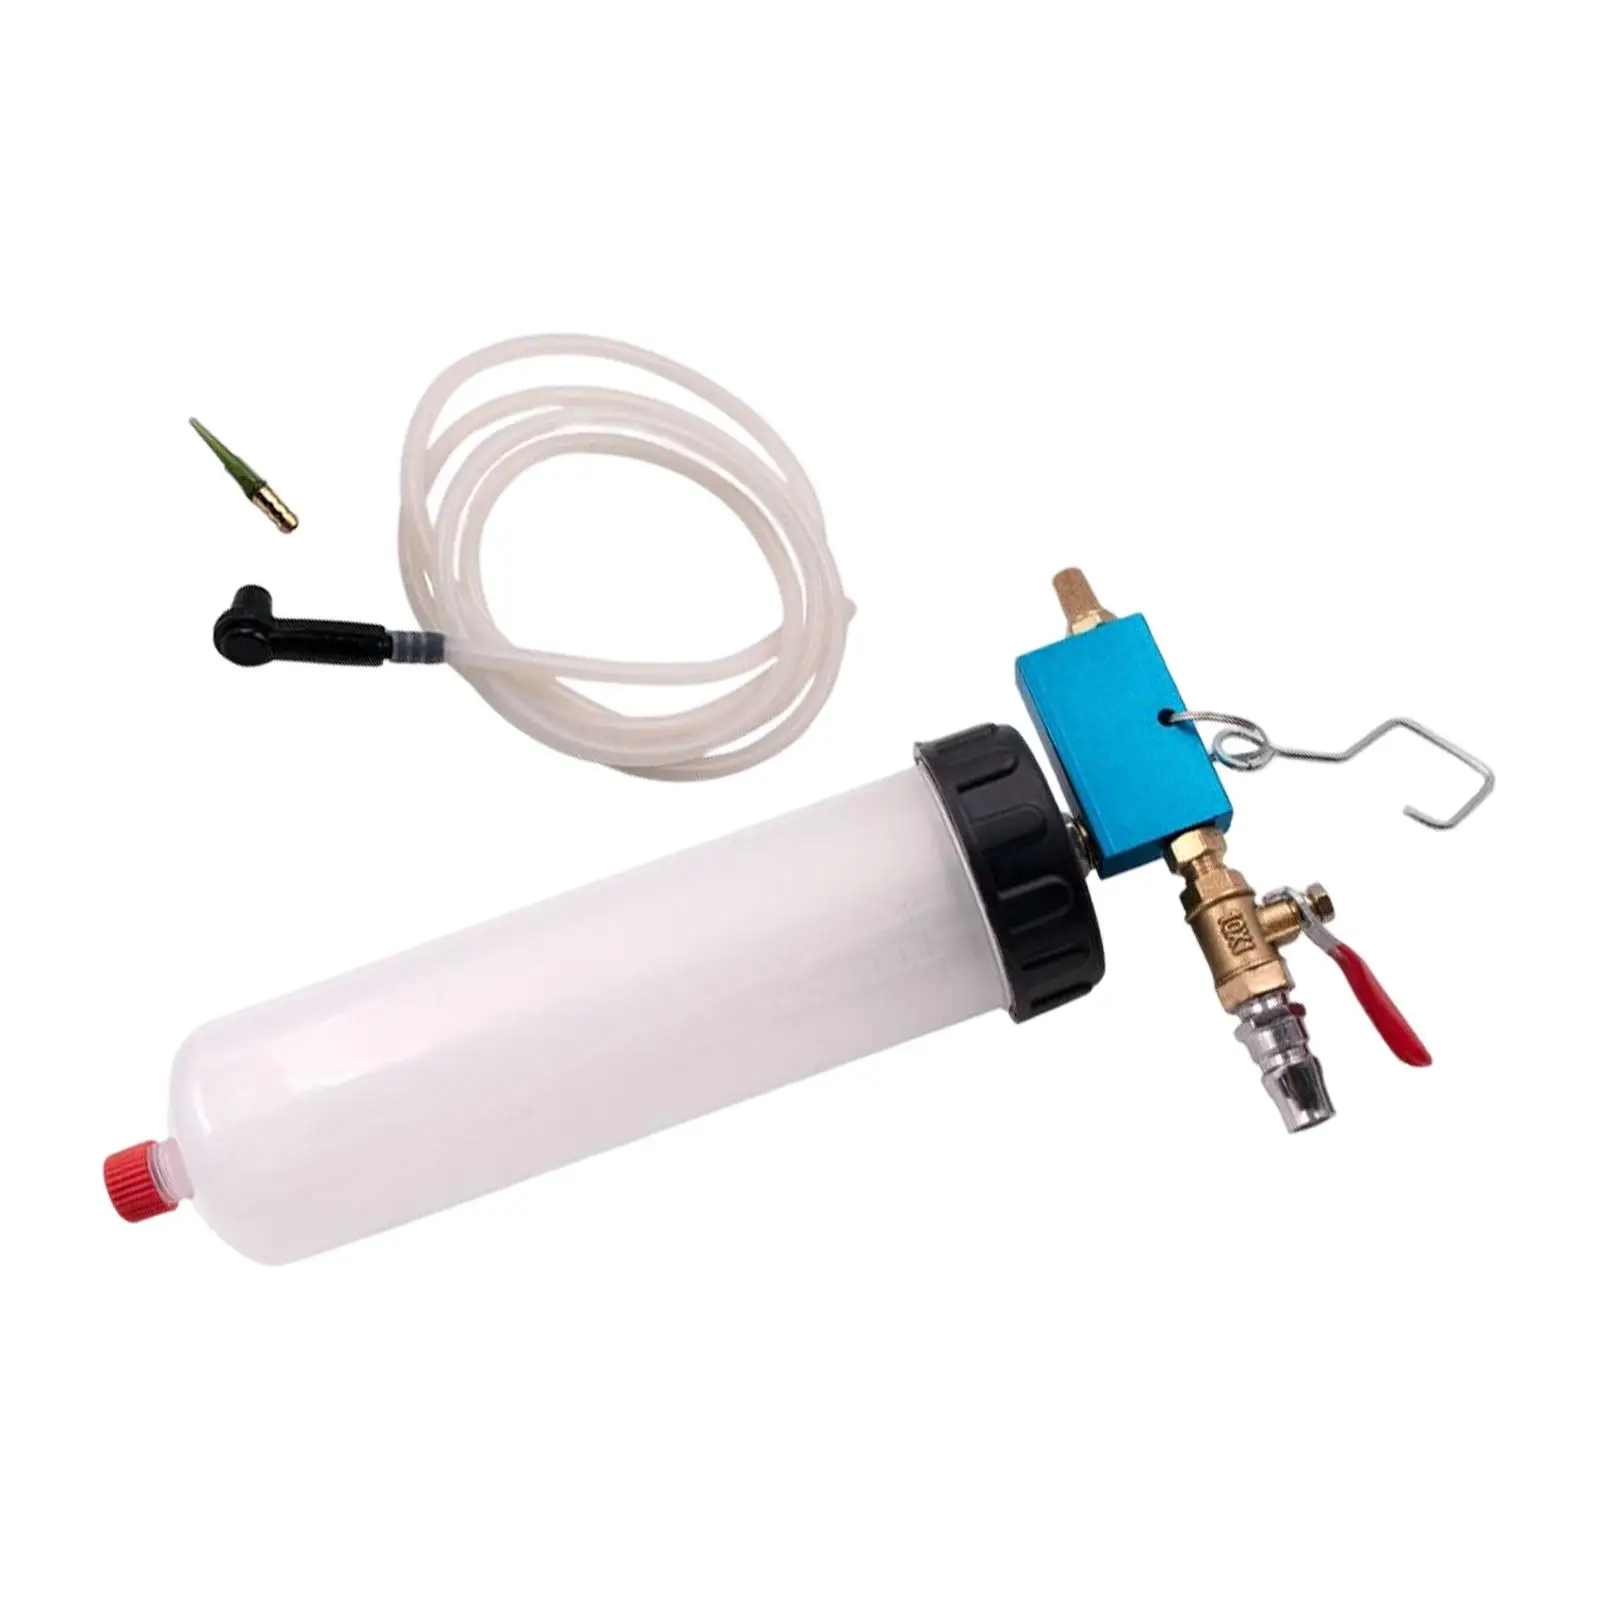 Universal Auto Brake  Extractor Pneumatic Evacuator Equipment Kit Brake Clutch  Drained Bleeder Tool for Motorcycle Truck Car.